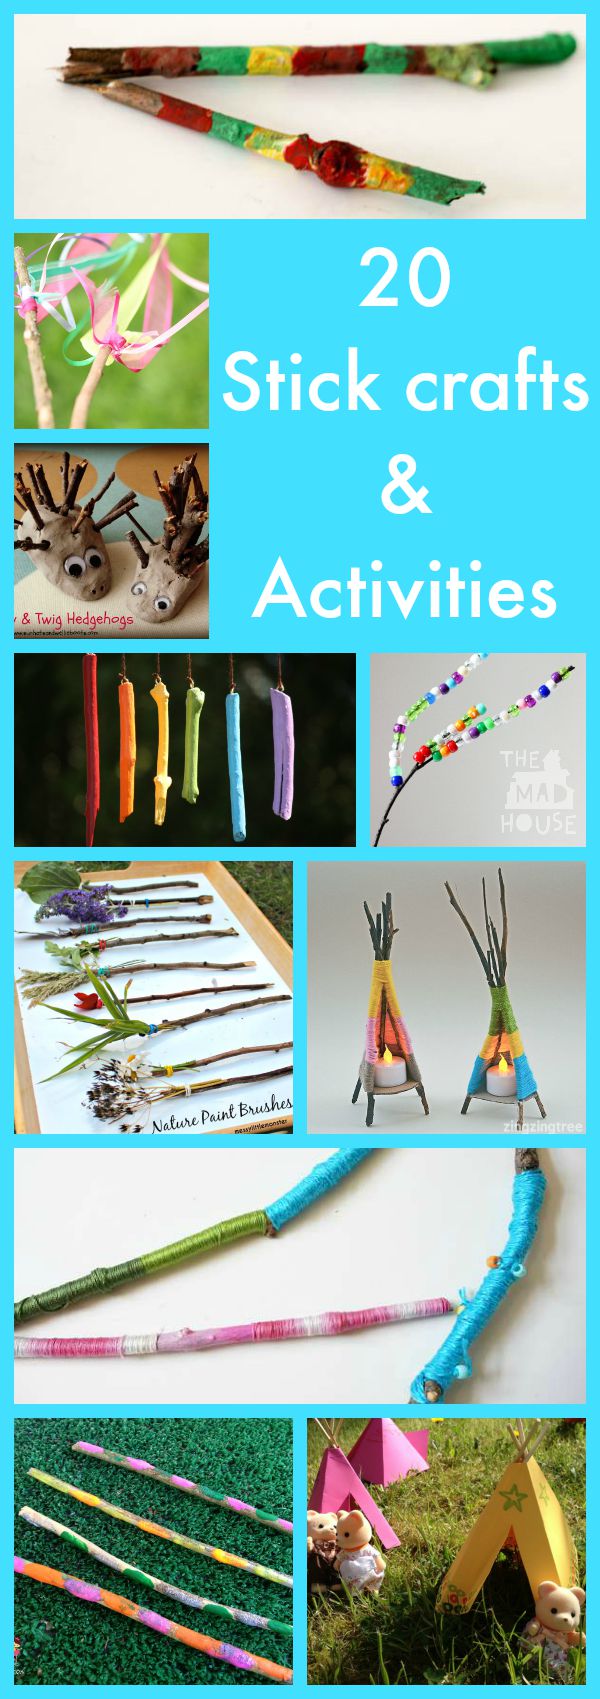 20 stick crafts and activities